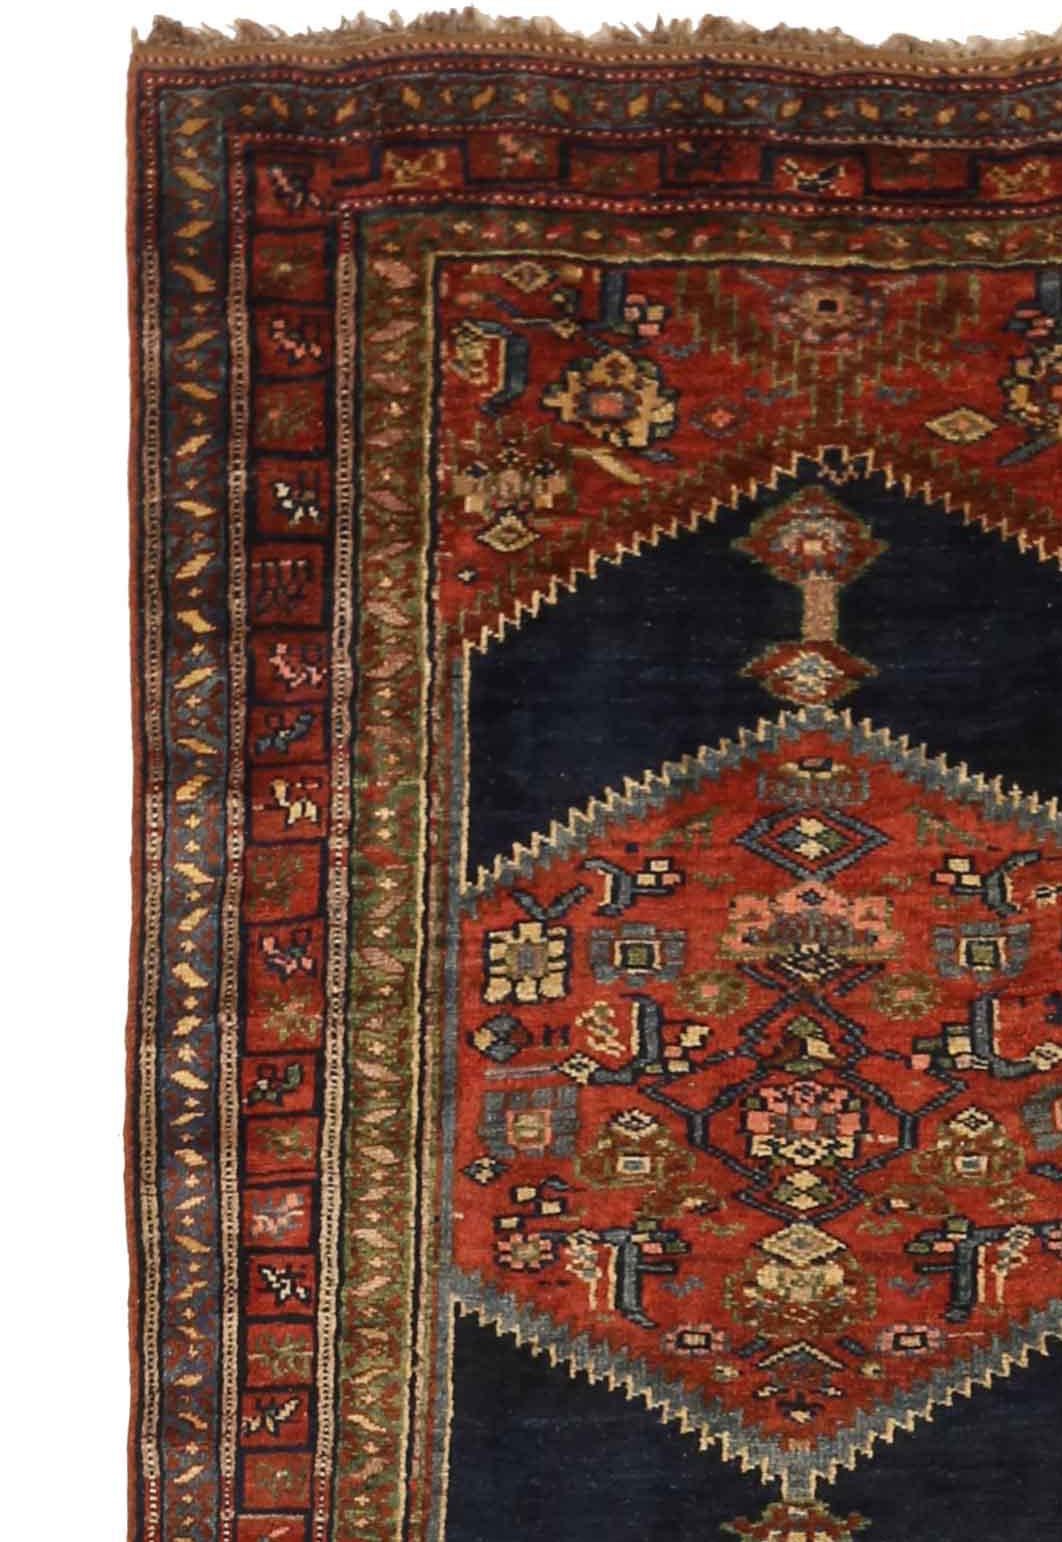 Antique Persian rug handwoven from the finest sheep’s wool and colored with all-natural vegetable dyes that are safe for humans and pets. It’s a traditional Bijar design featuring floral medallion details inside large arrowheads in navy blue over a